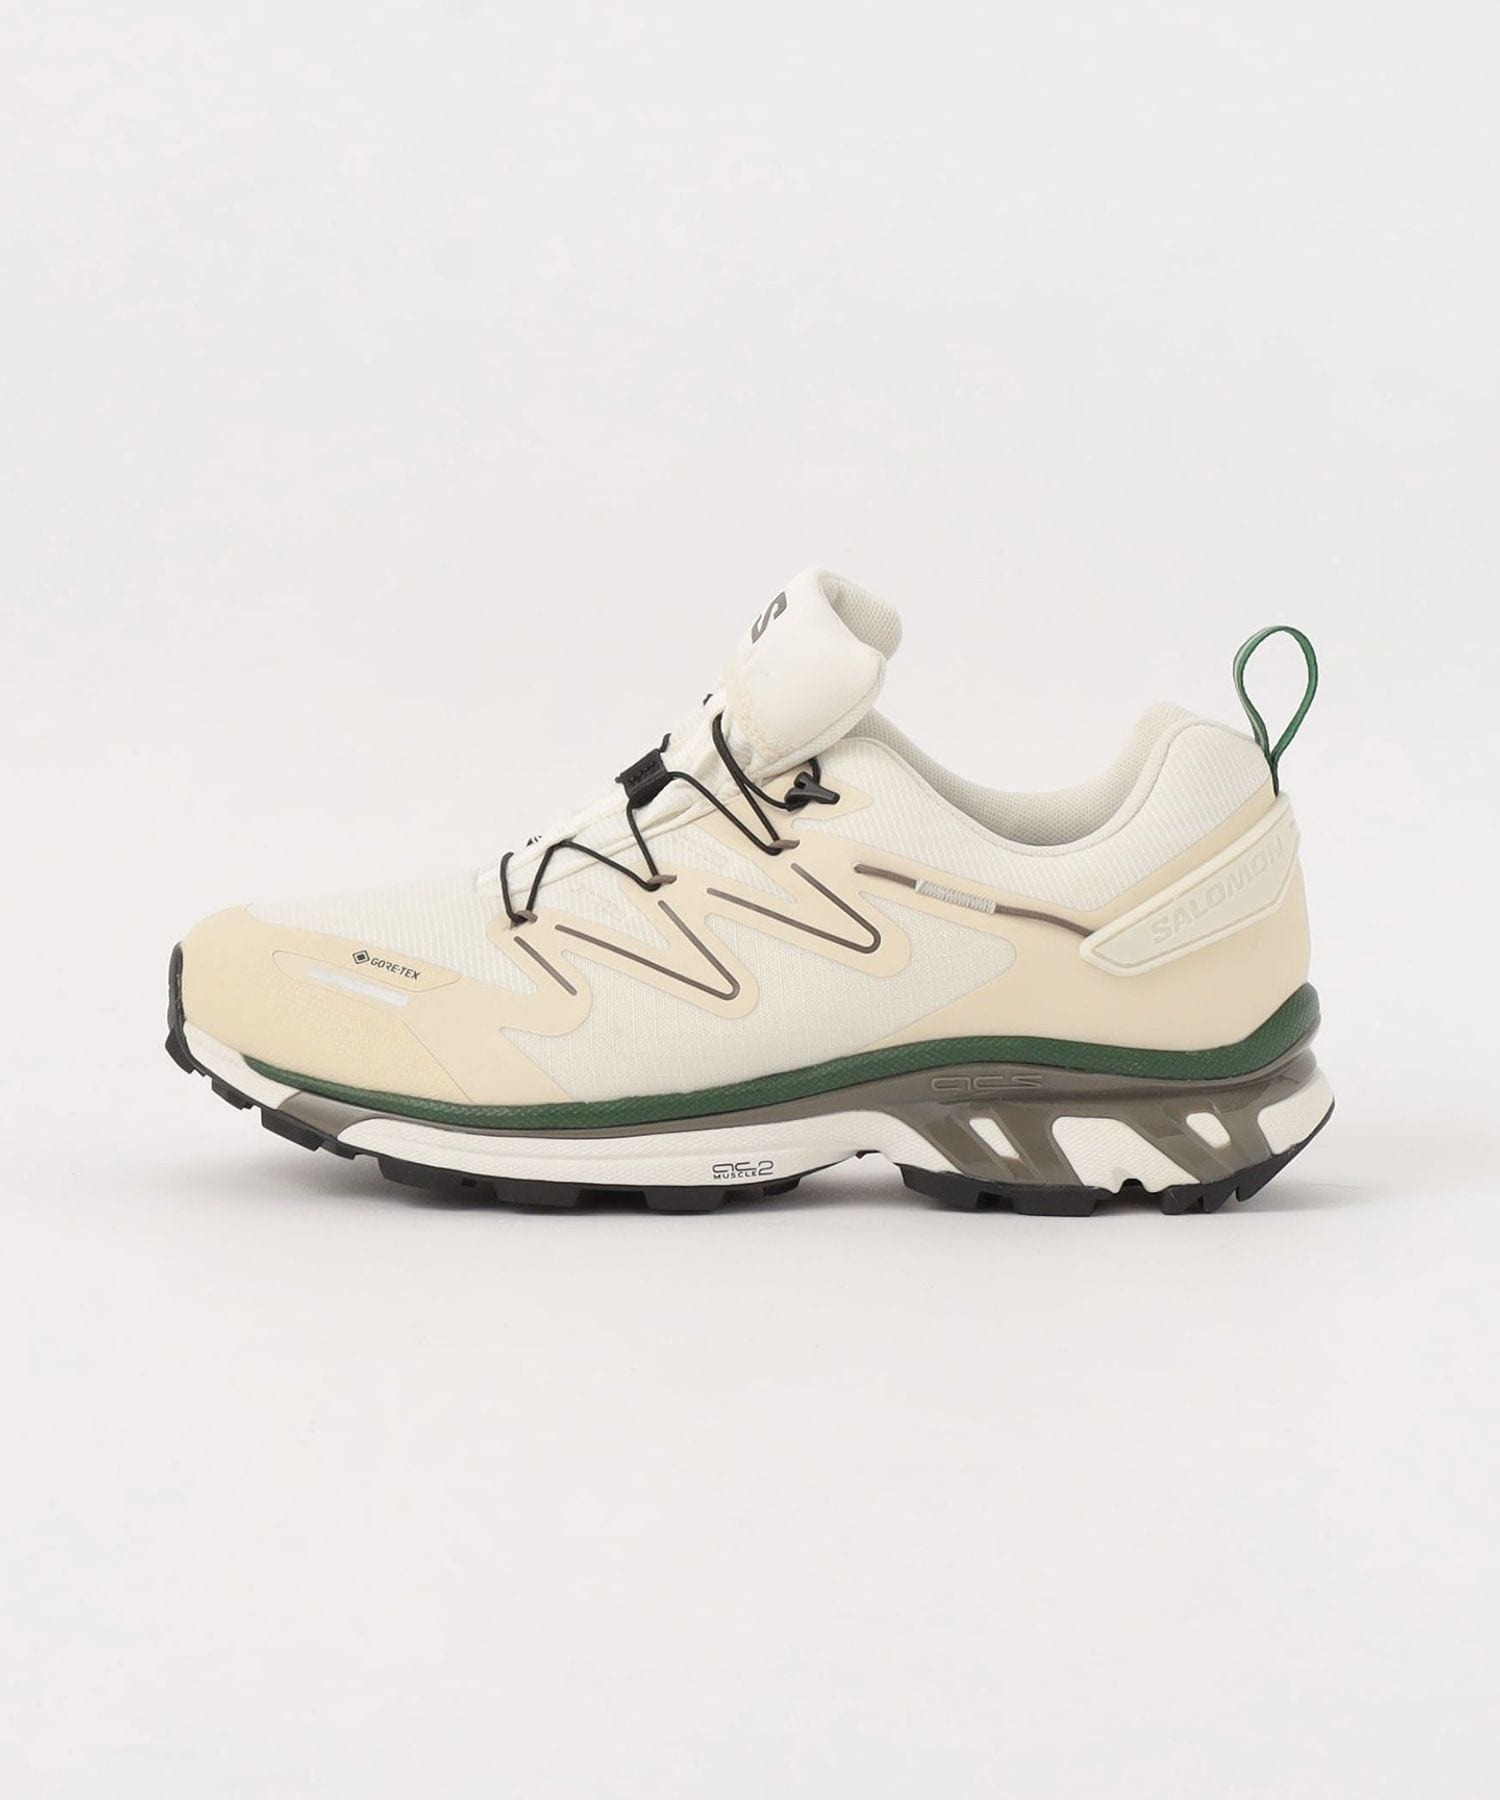 Salomon & BEAUTY & YOUTH UNITED ARROWS' XT-Rush 2 GORE-TEX sneaker collab in beige and cream colorway